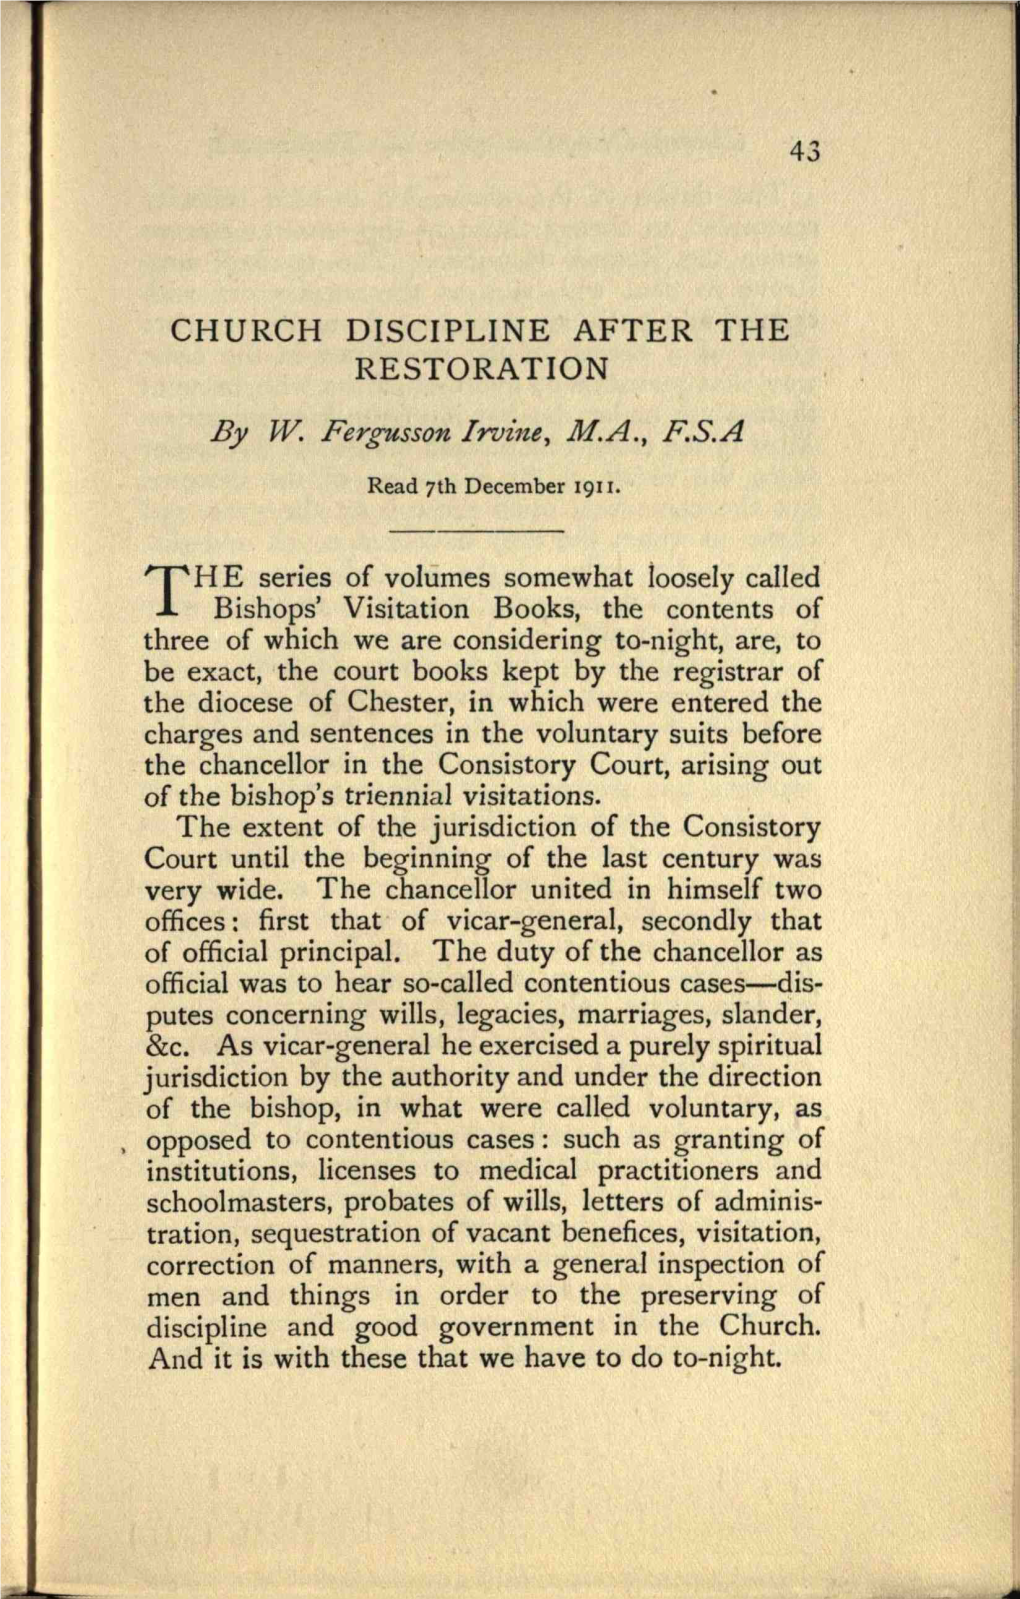 CHURCH DISCIPLINE AFTER the RESTORATION by W